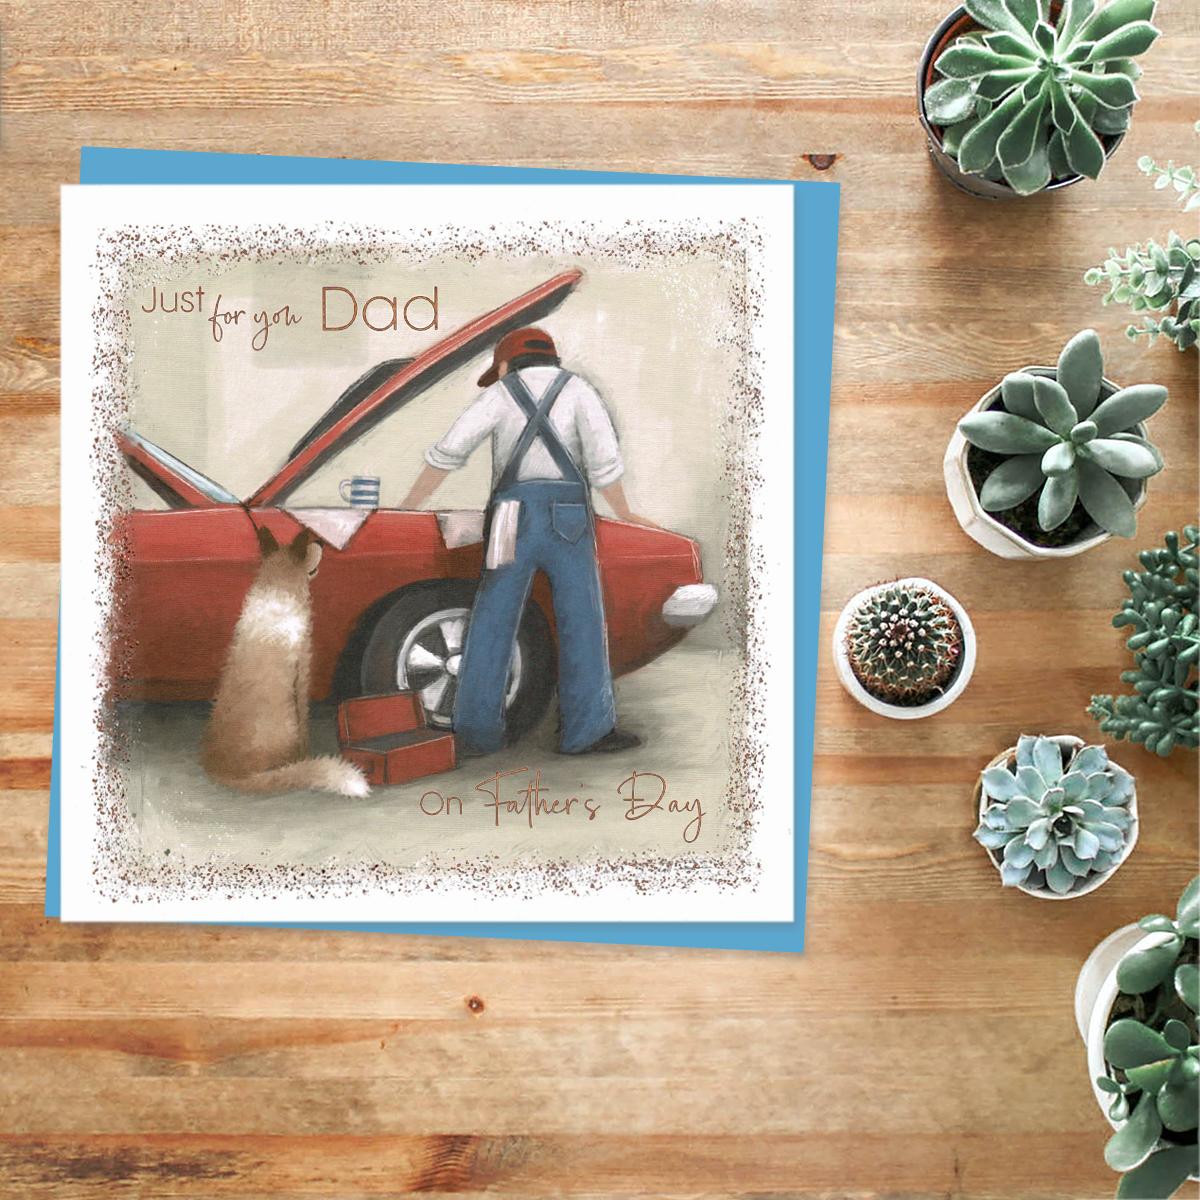 'Just For You Dad' Father's Day Card Featuring A Mechanic Looking Into A Car Bonnet With Dog Nearby! Complete With copper Sparkle And Blue Envelope